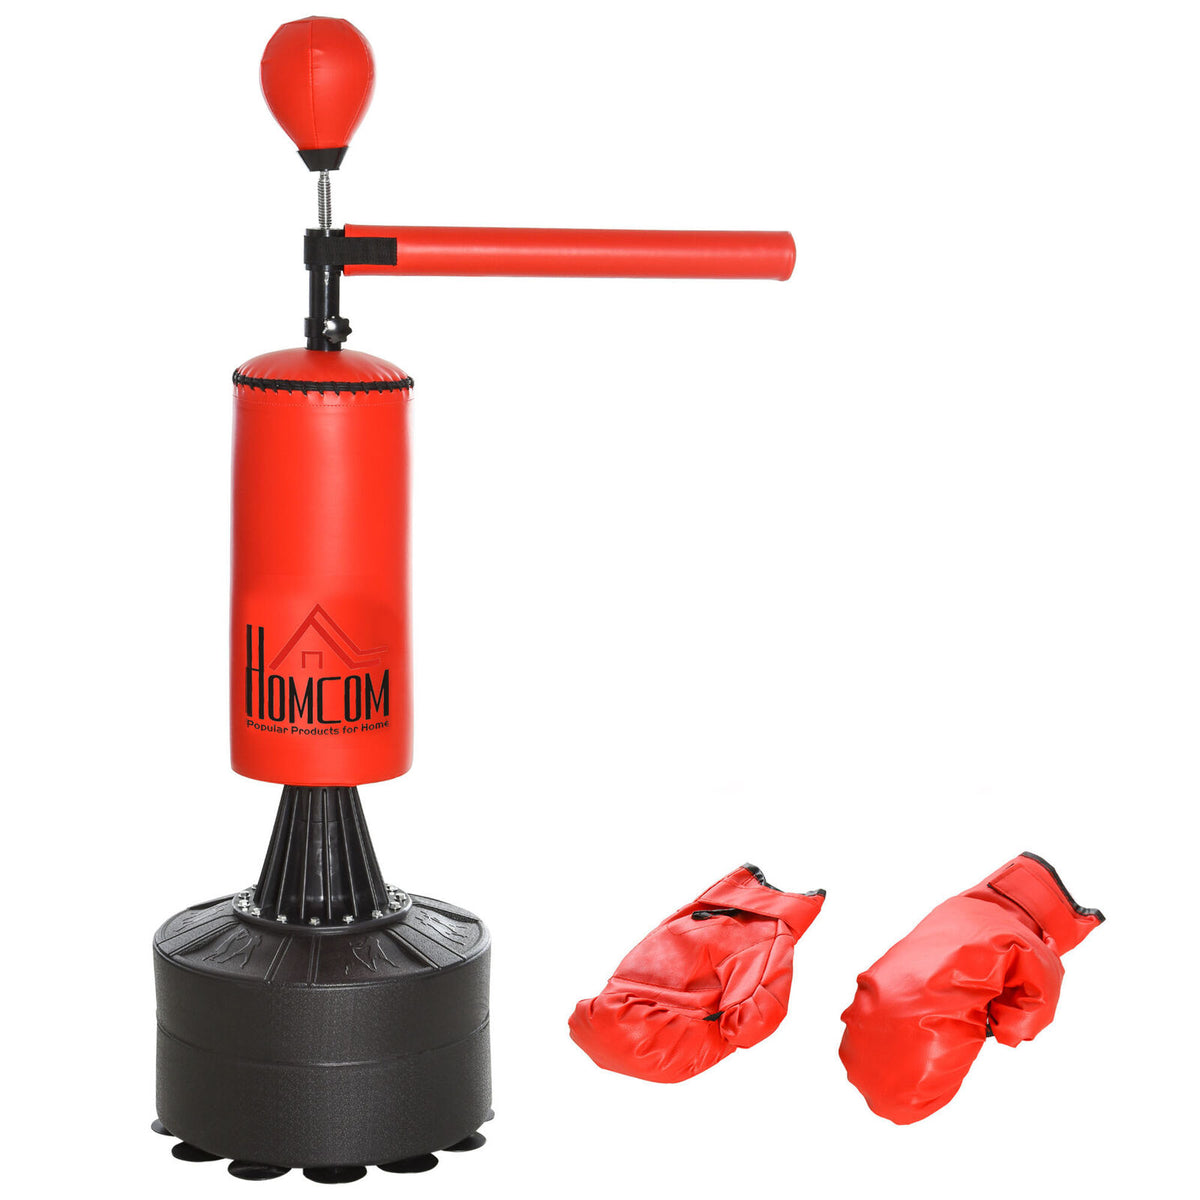 Freestanding Punch Bag Stand - Boxing Punch Bag Stand Rotating Flexible Arm Speed Ball Waterable Base